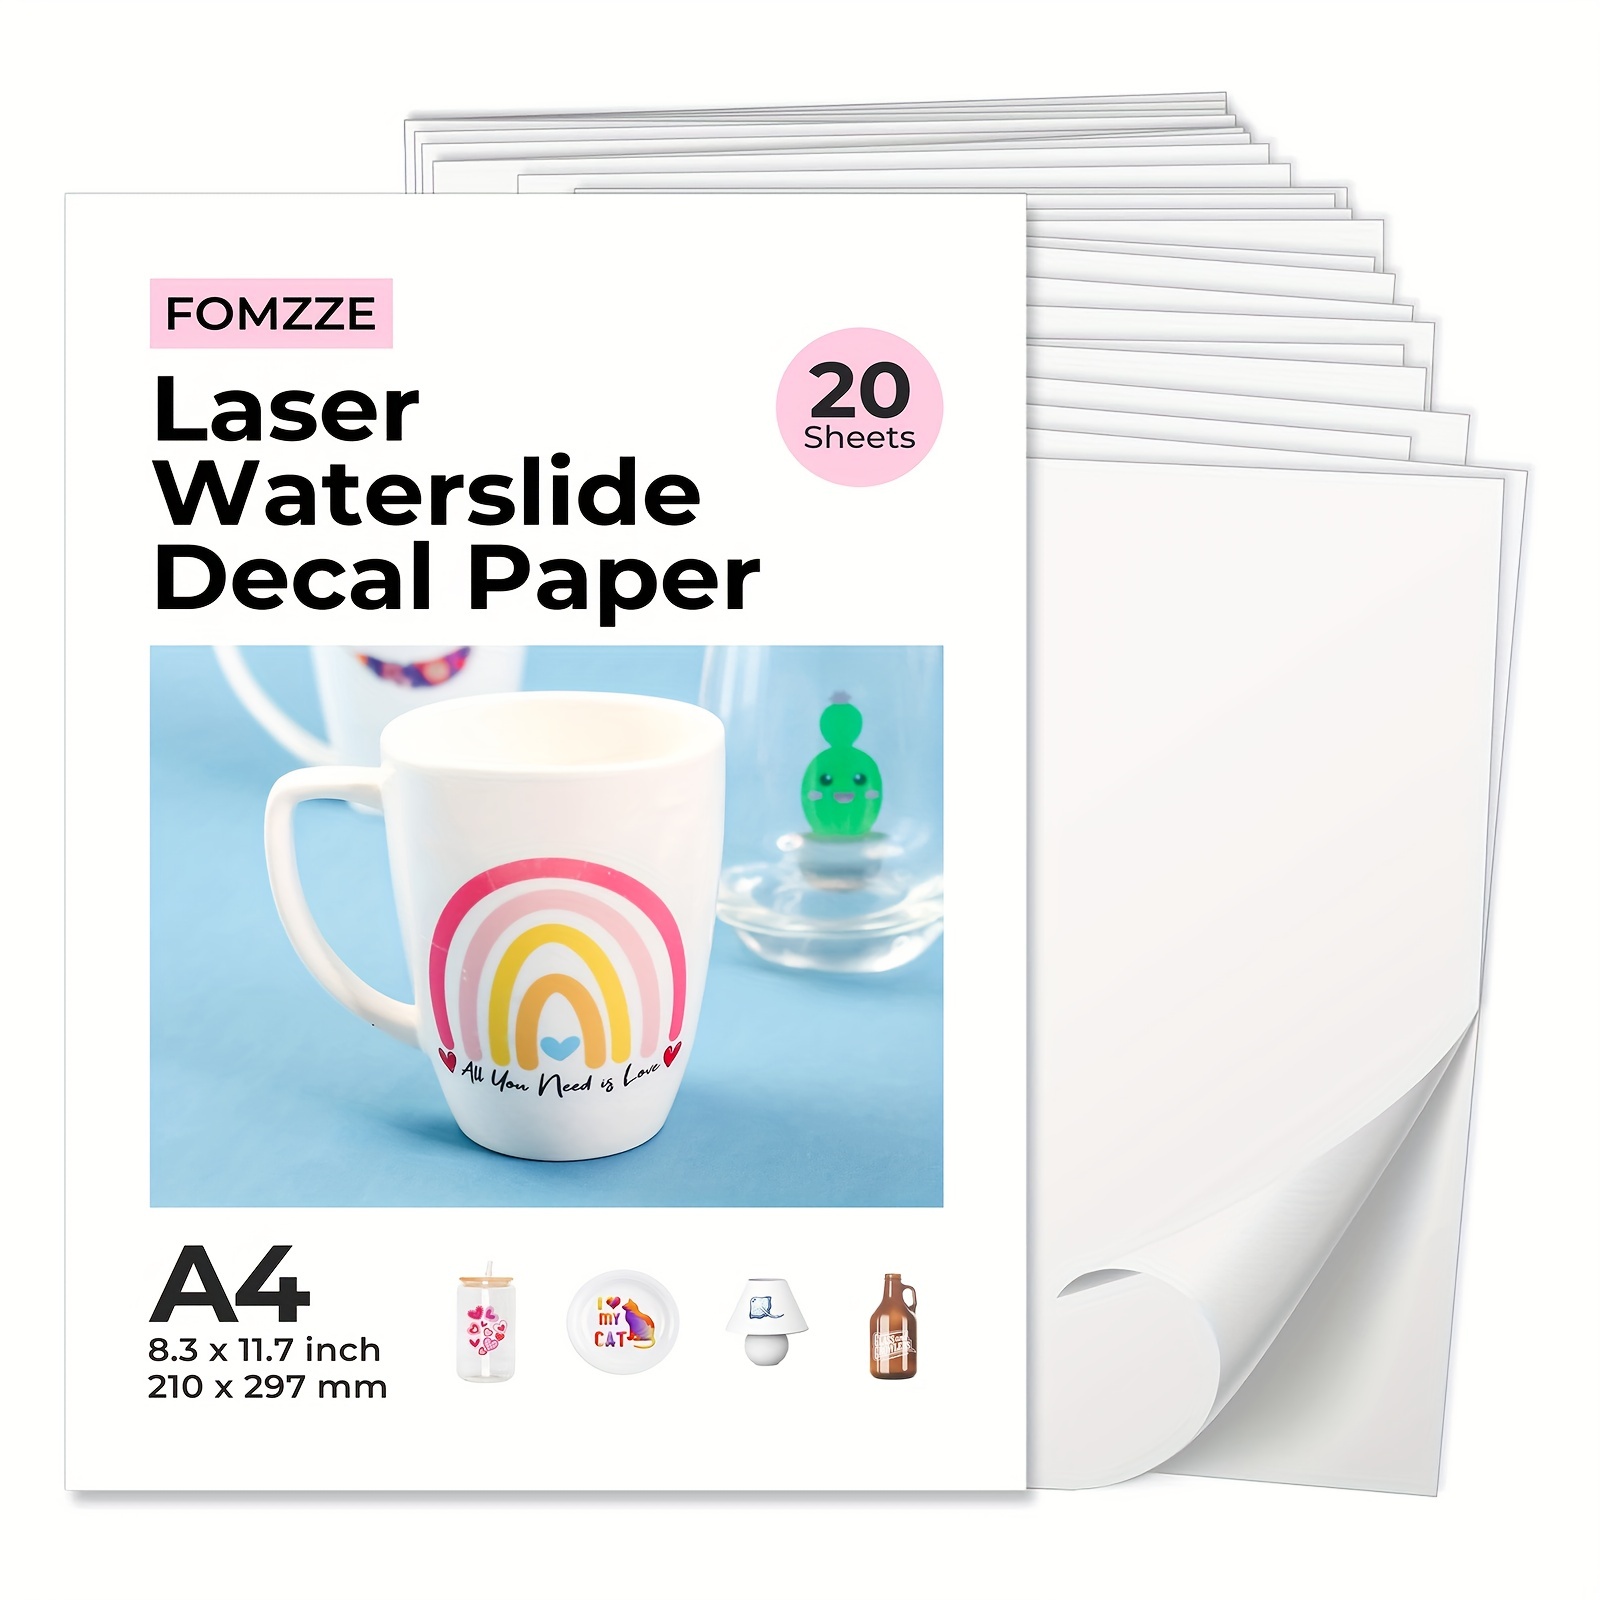 Film Free Laser Water Slide Transfer Decal Paper Waterslide Decal Paper  White A4 Size For Mug Glass Ceramics